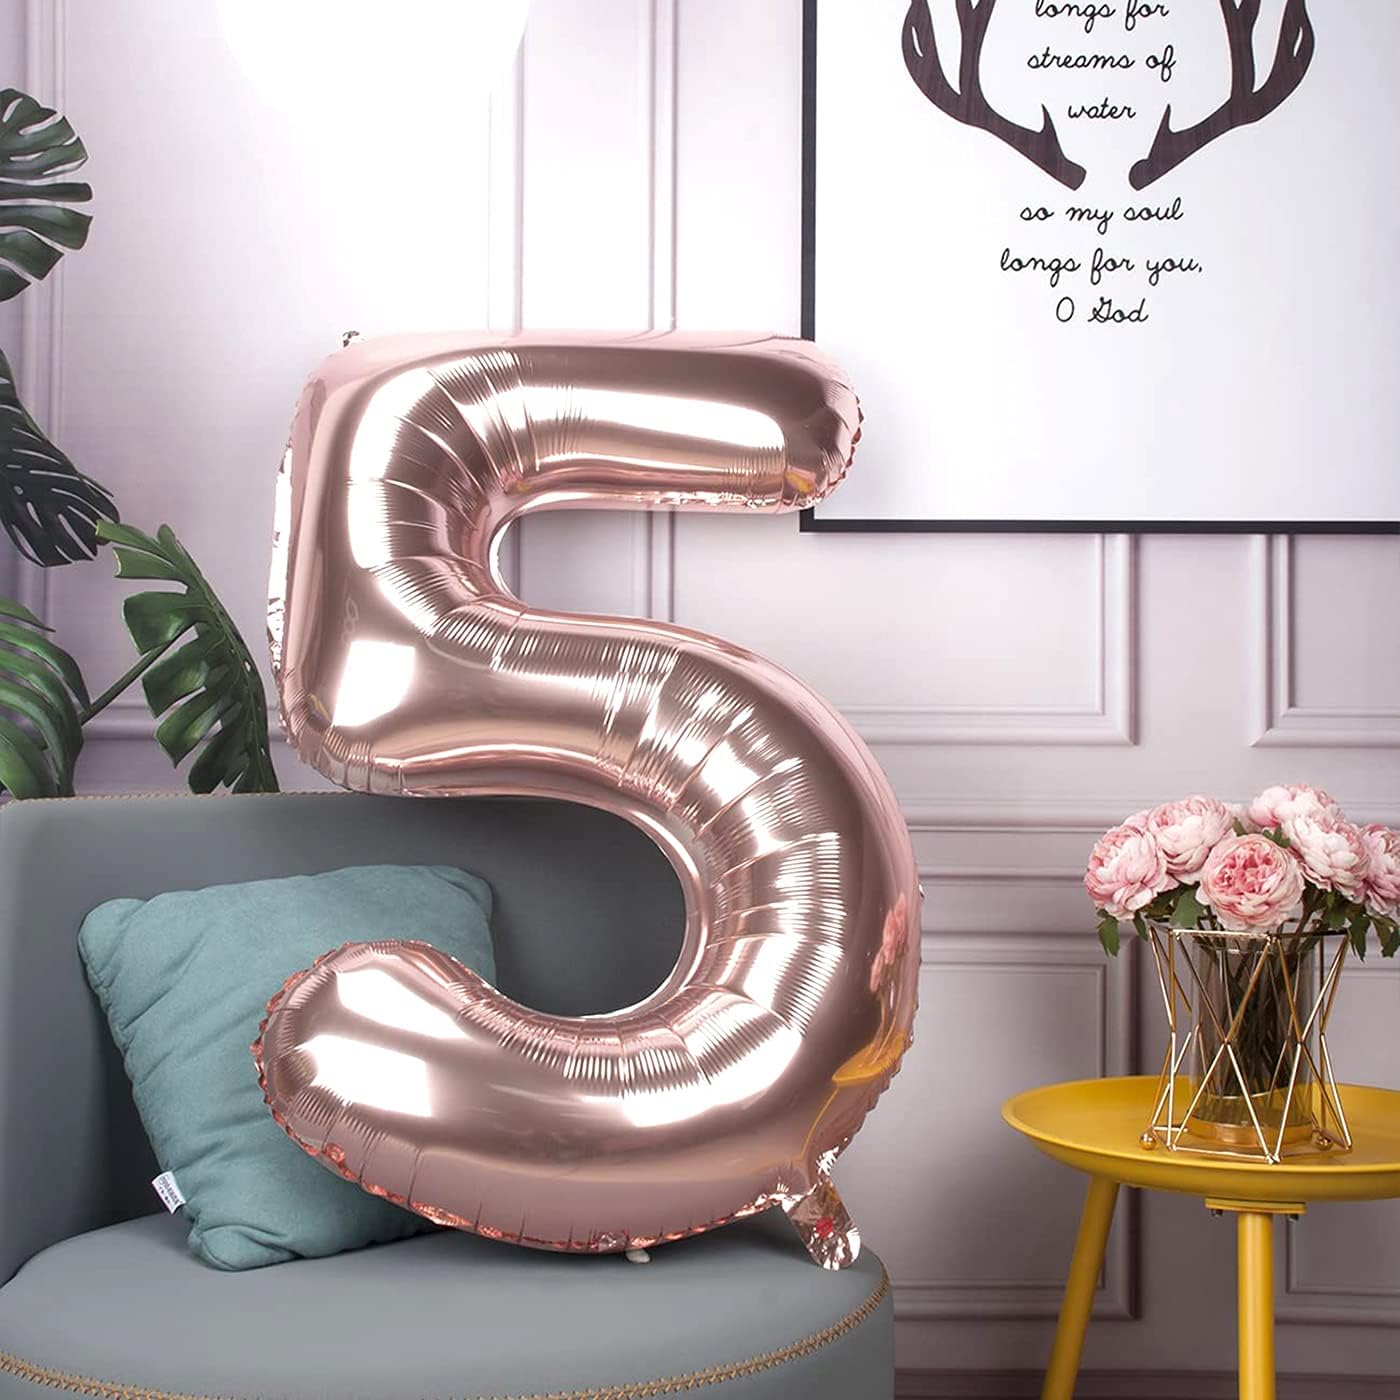 50 Number Balloons Rose Gold Big Giant Jumbo Number 50 Foil Mylar Balloons for 50th Birthday Party Supplies 50 Anniversary Events Decorations